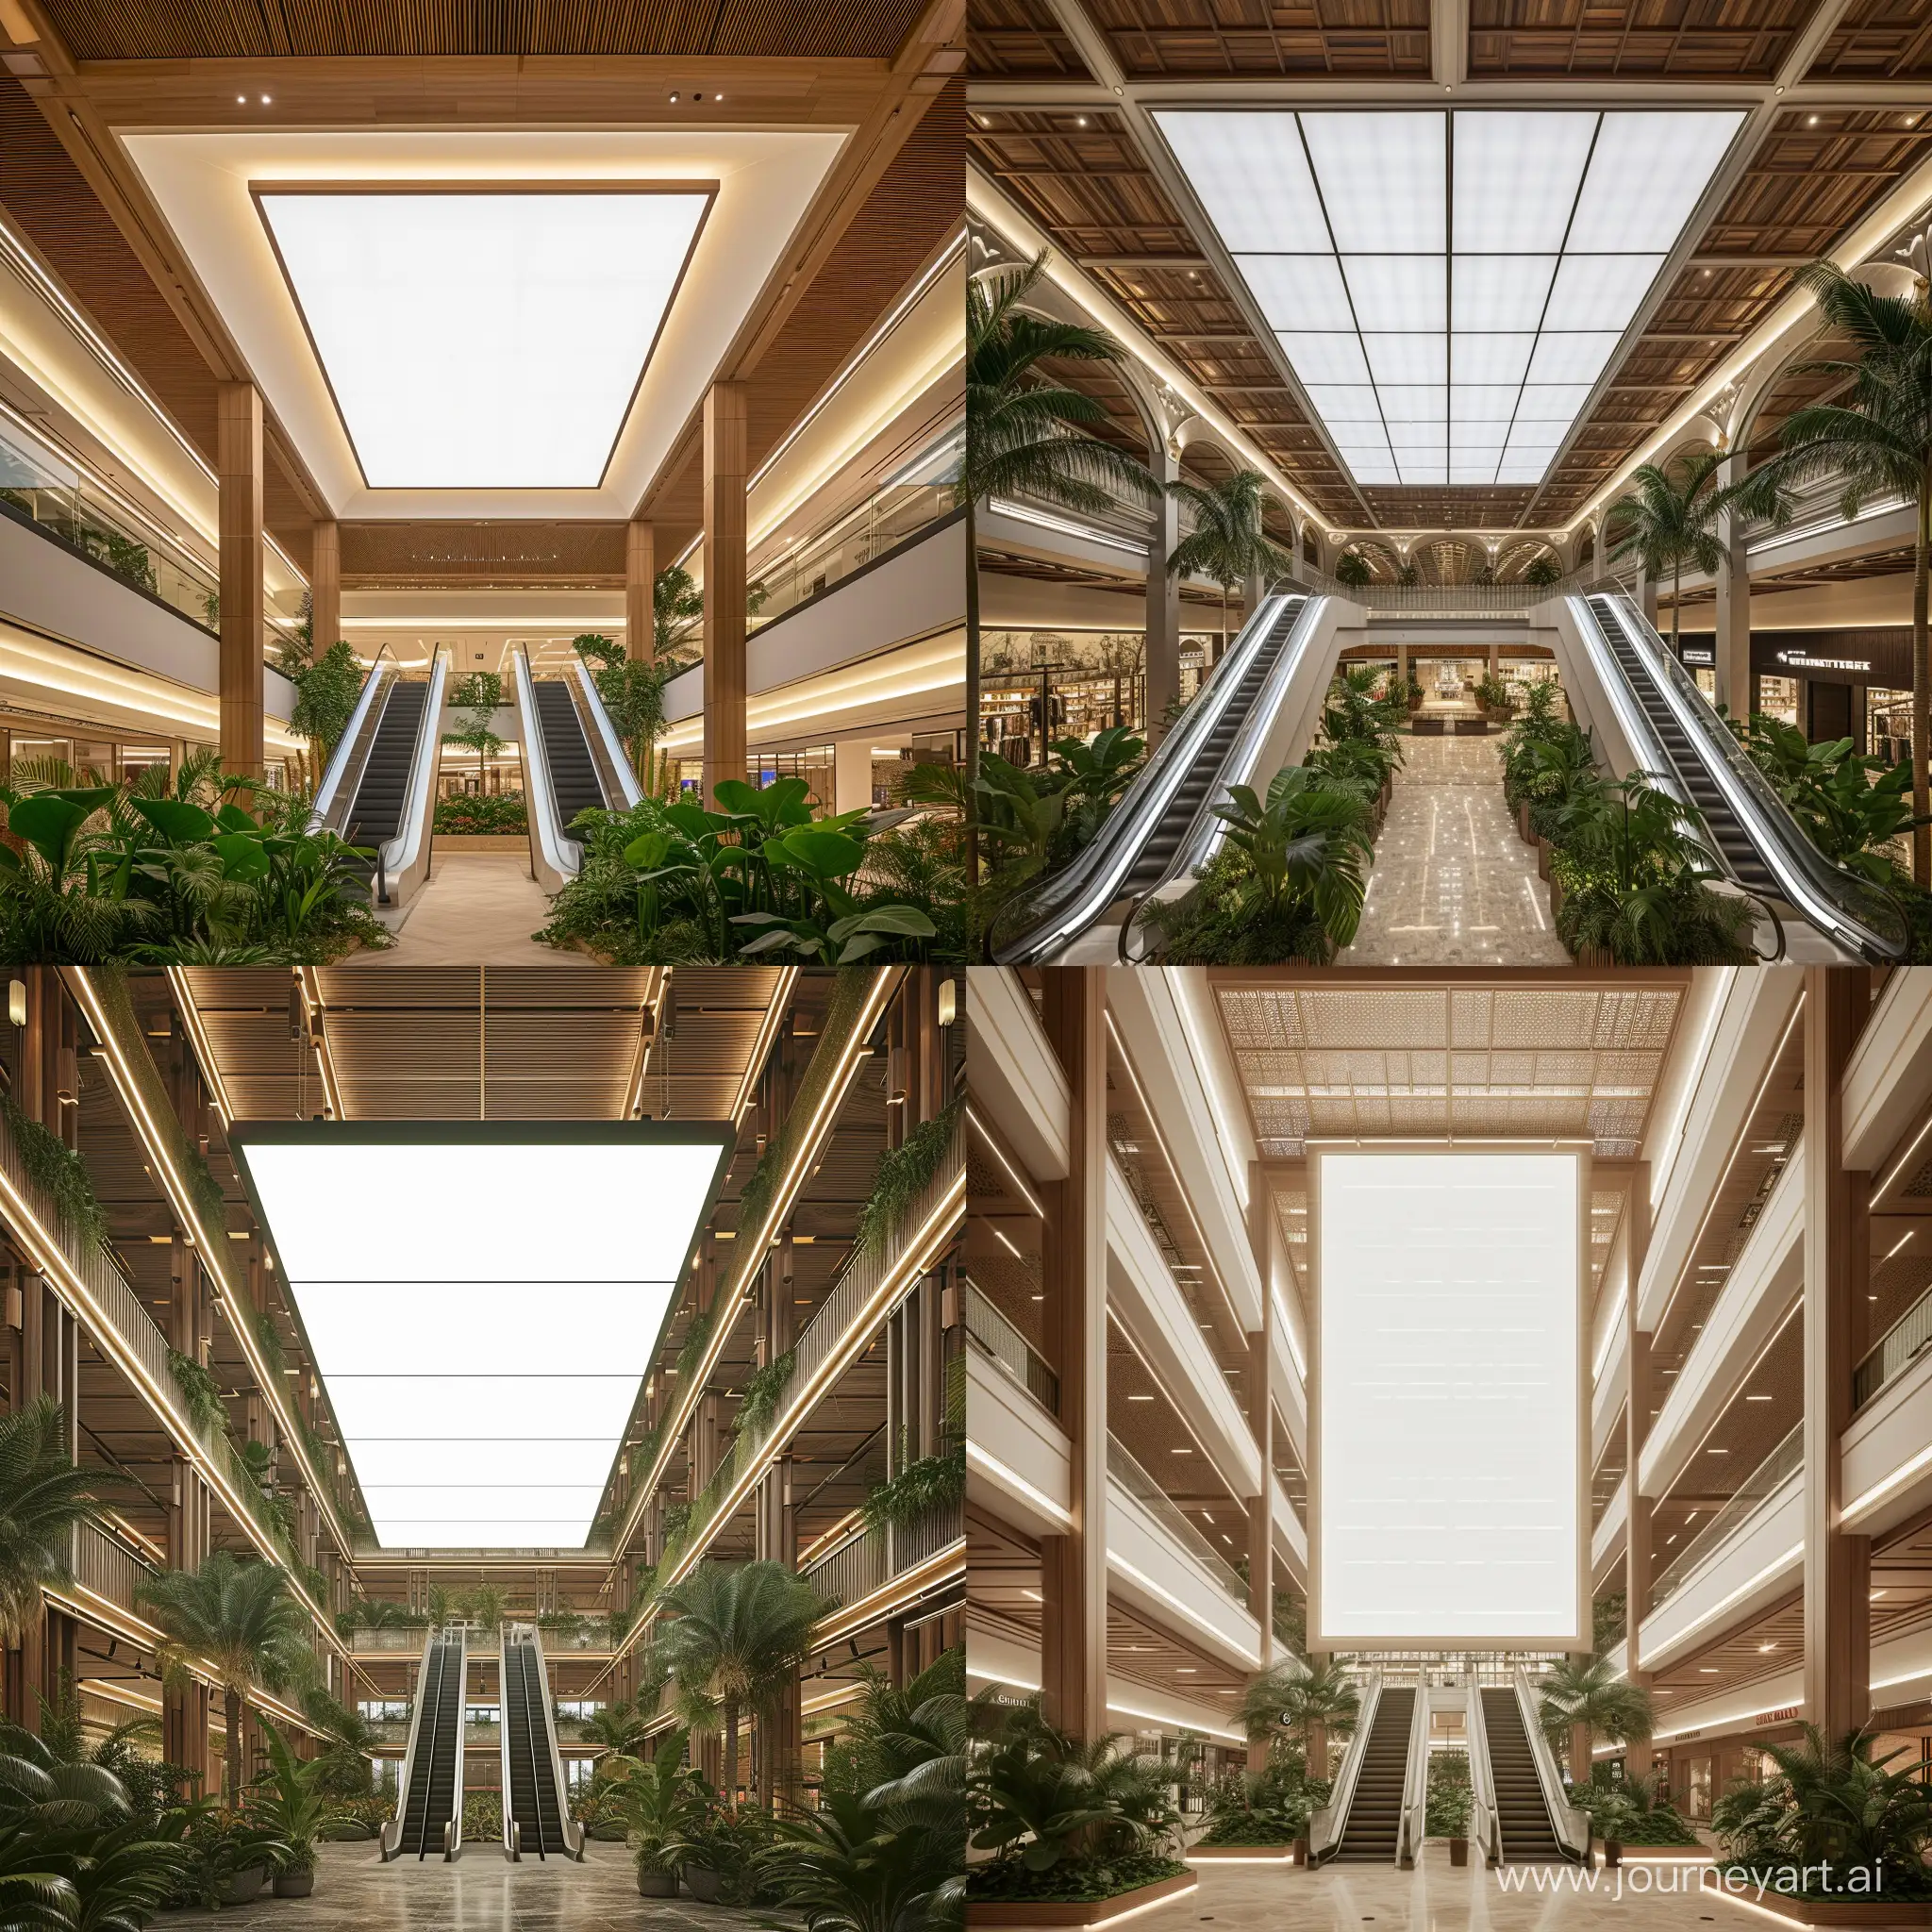 Tropical-Wood-Vaulted-Atrium-with-Escalators-in-3Story-Department-Store